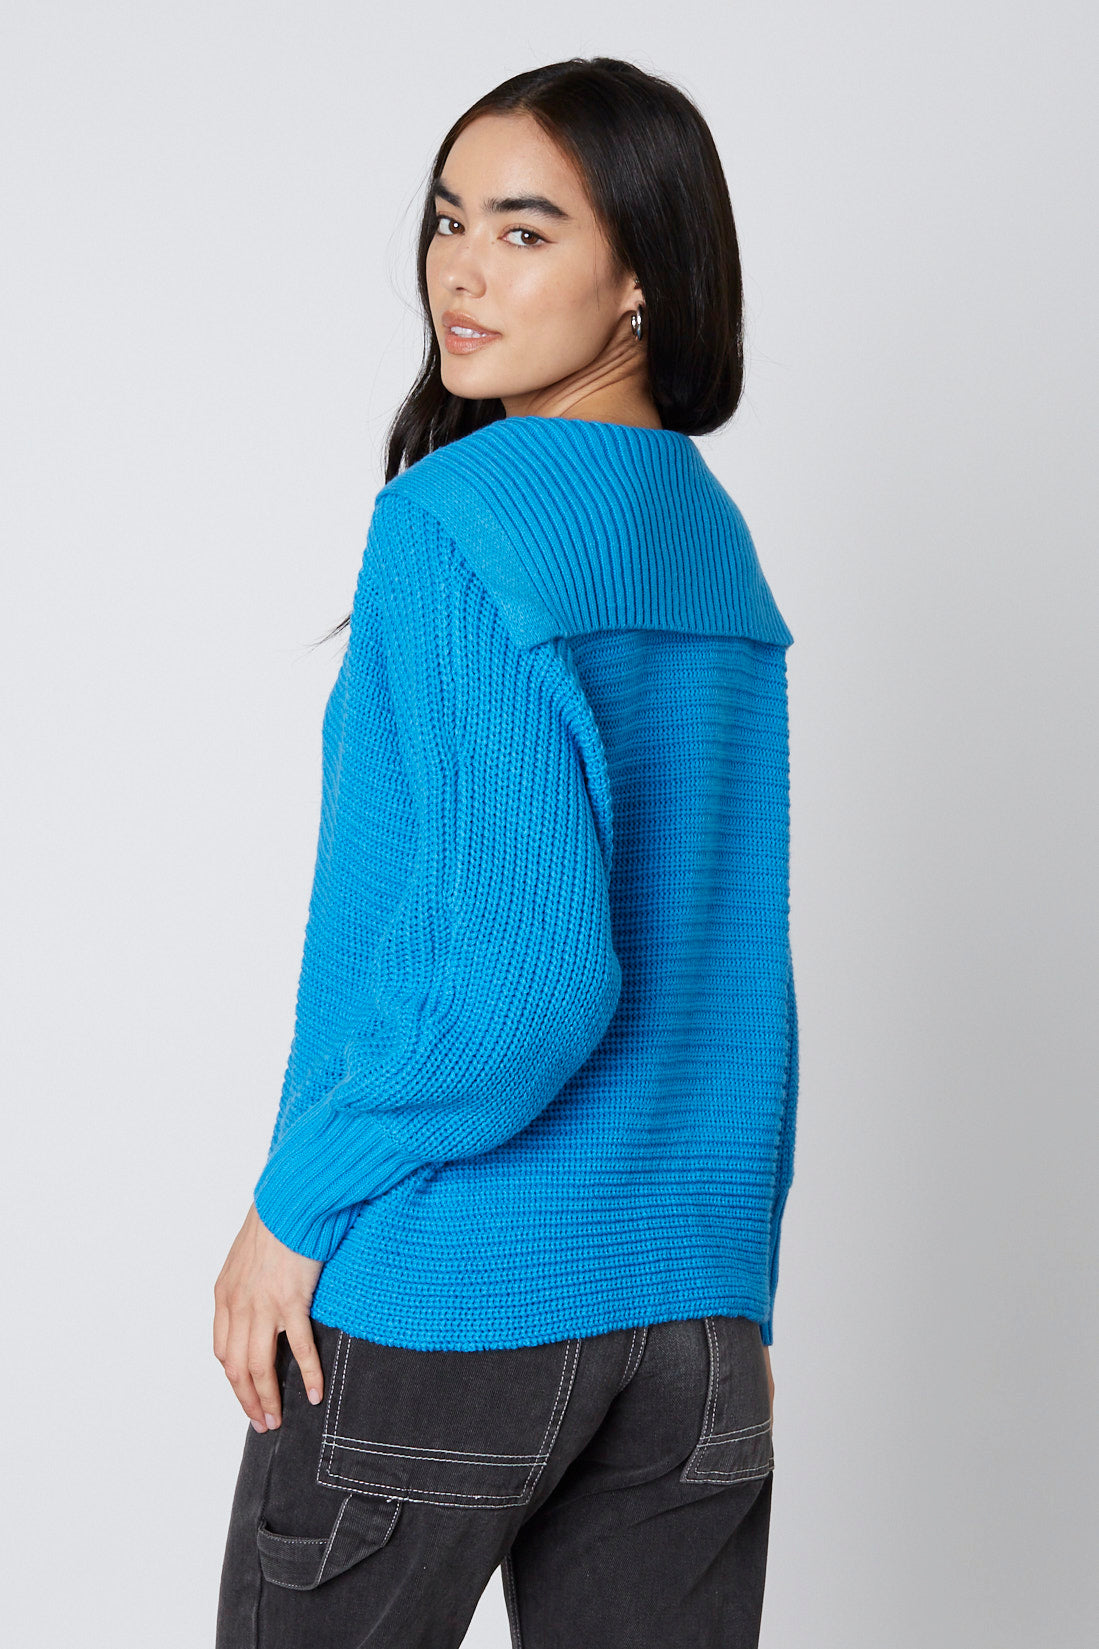 Notched Collar Sweater in Marine Blue Back